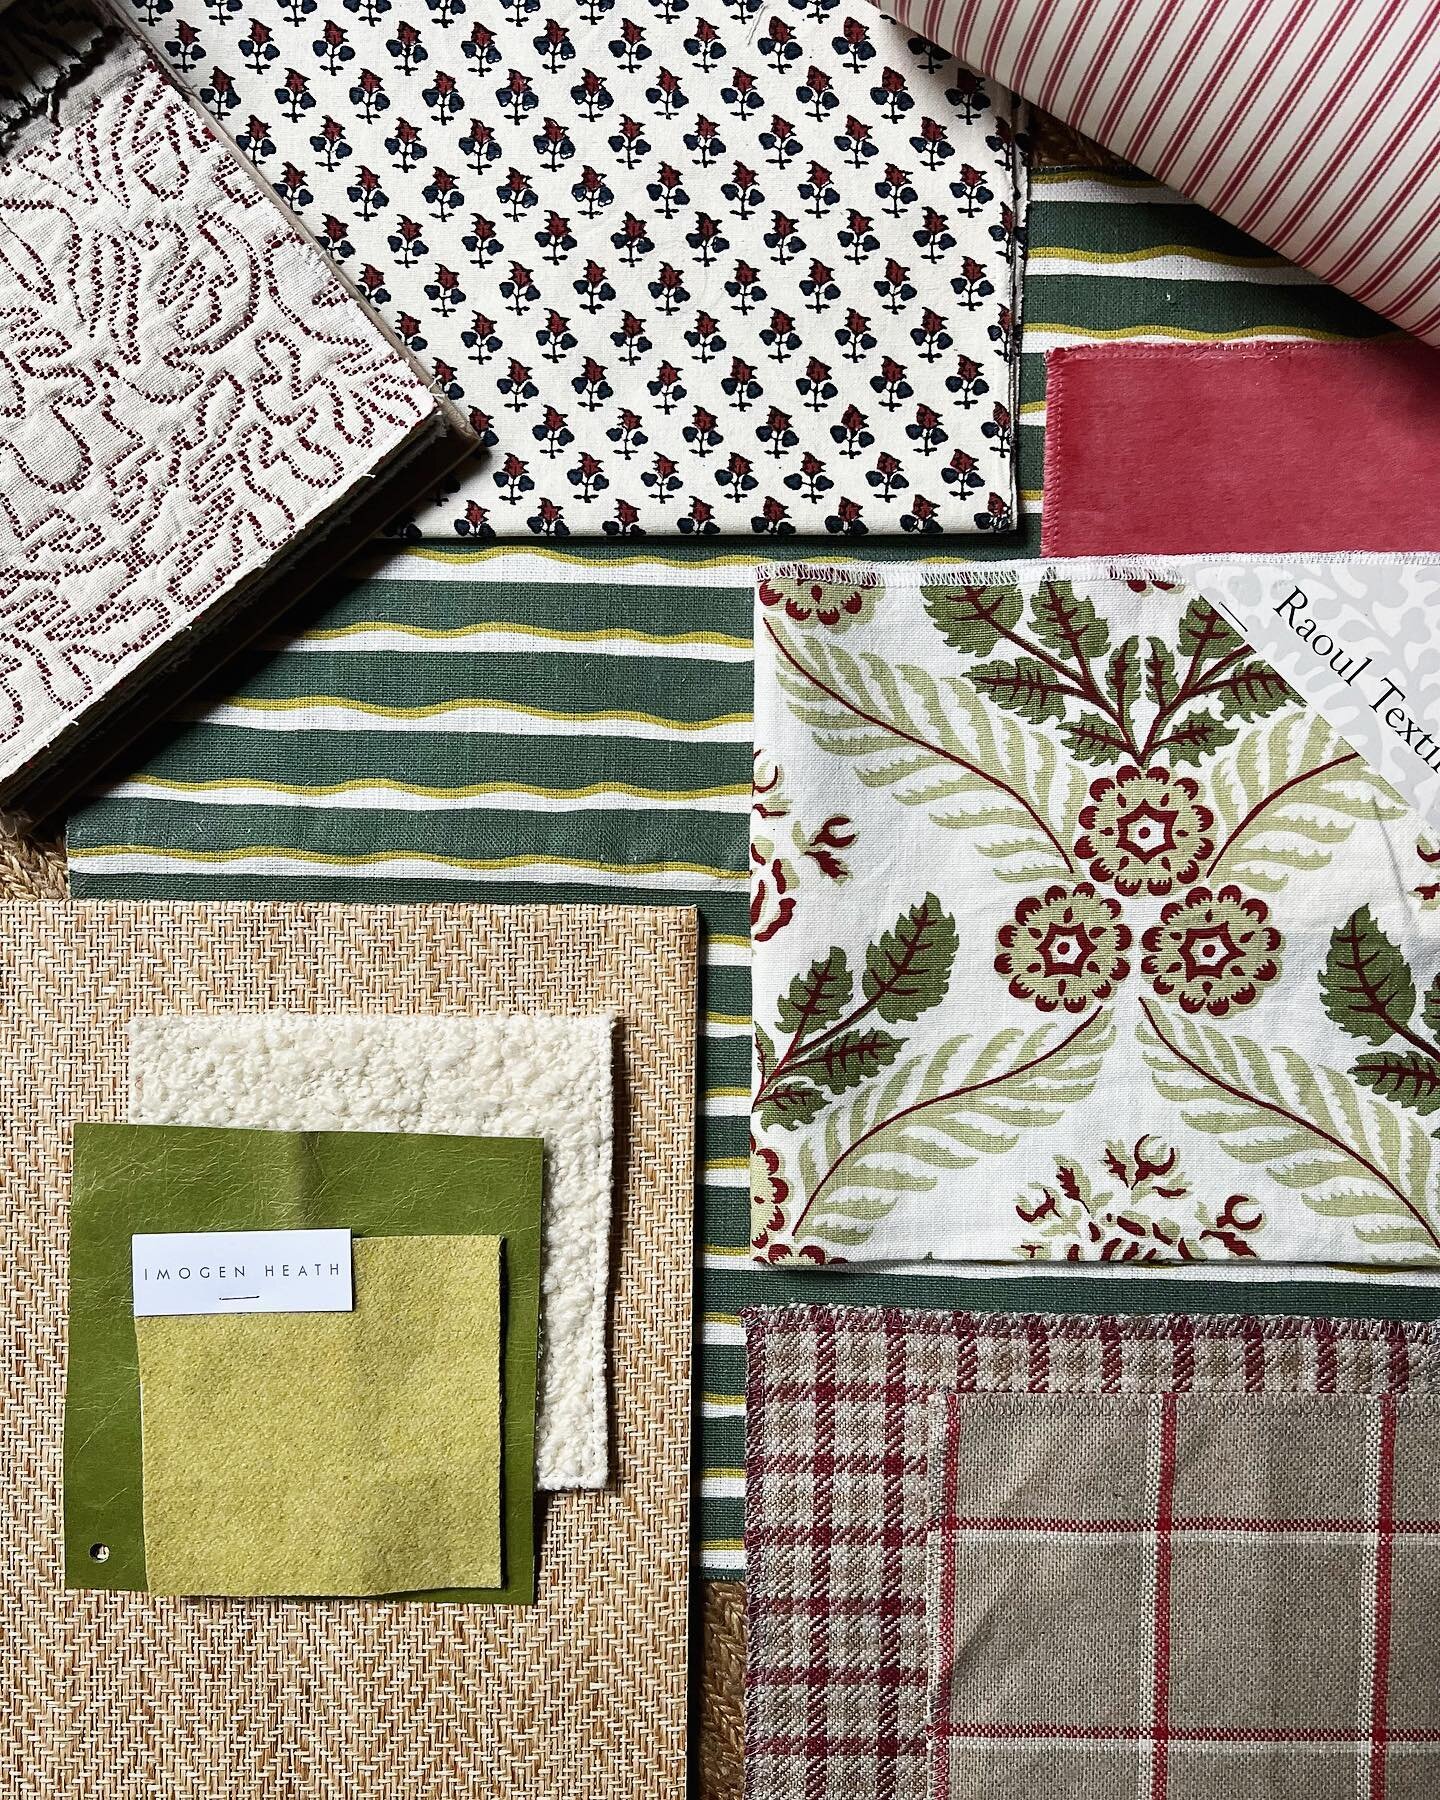 A Christmas scheme with rich green and red patterns and textures from a few of the collections that we represent 🎄

&hellip;..
#fabrictothetrade #textiles #raoultextiles #imogenheathinteriors #ianmankin #cortinaleathers #lewisandwood #twenty2grasscl